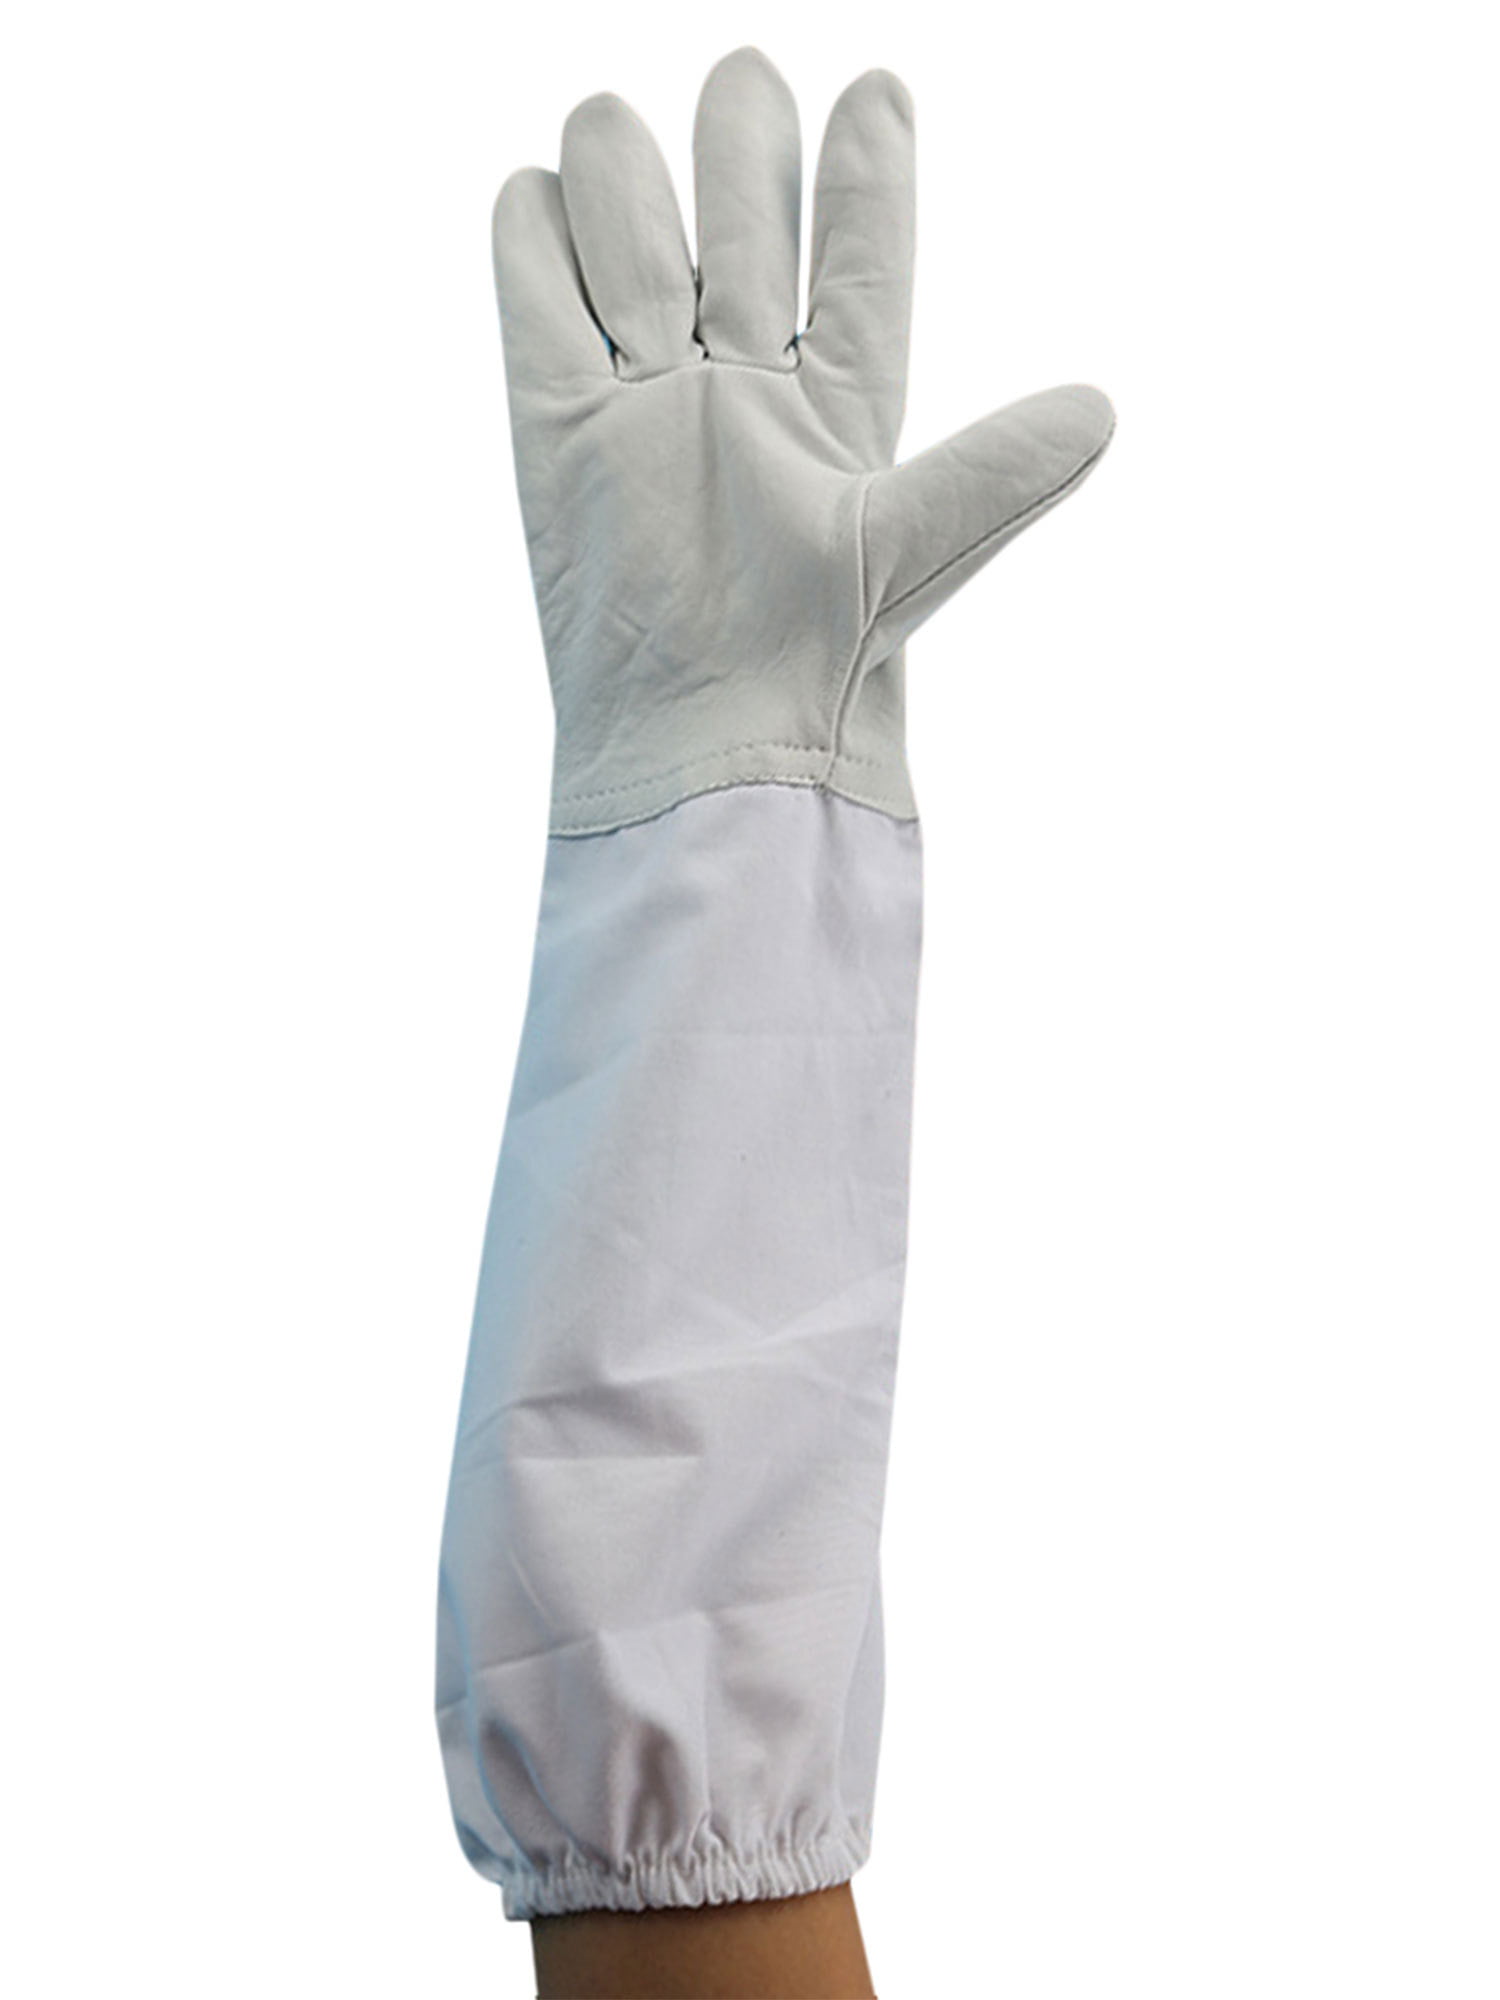 1 Pair Beekeeping Protective Gloves with Vented Long Sleeves-Grey and White XXL 